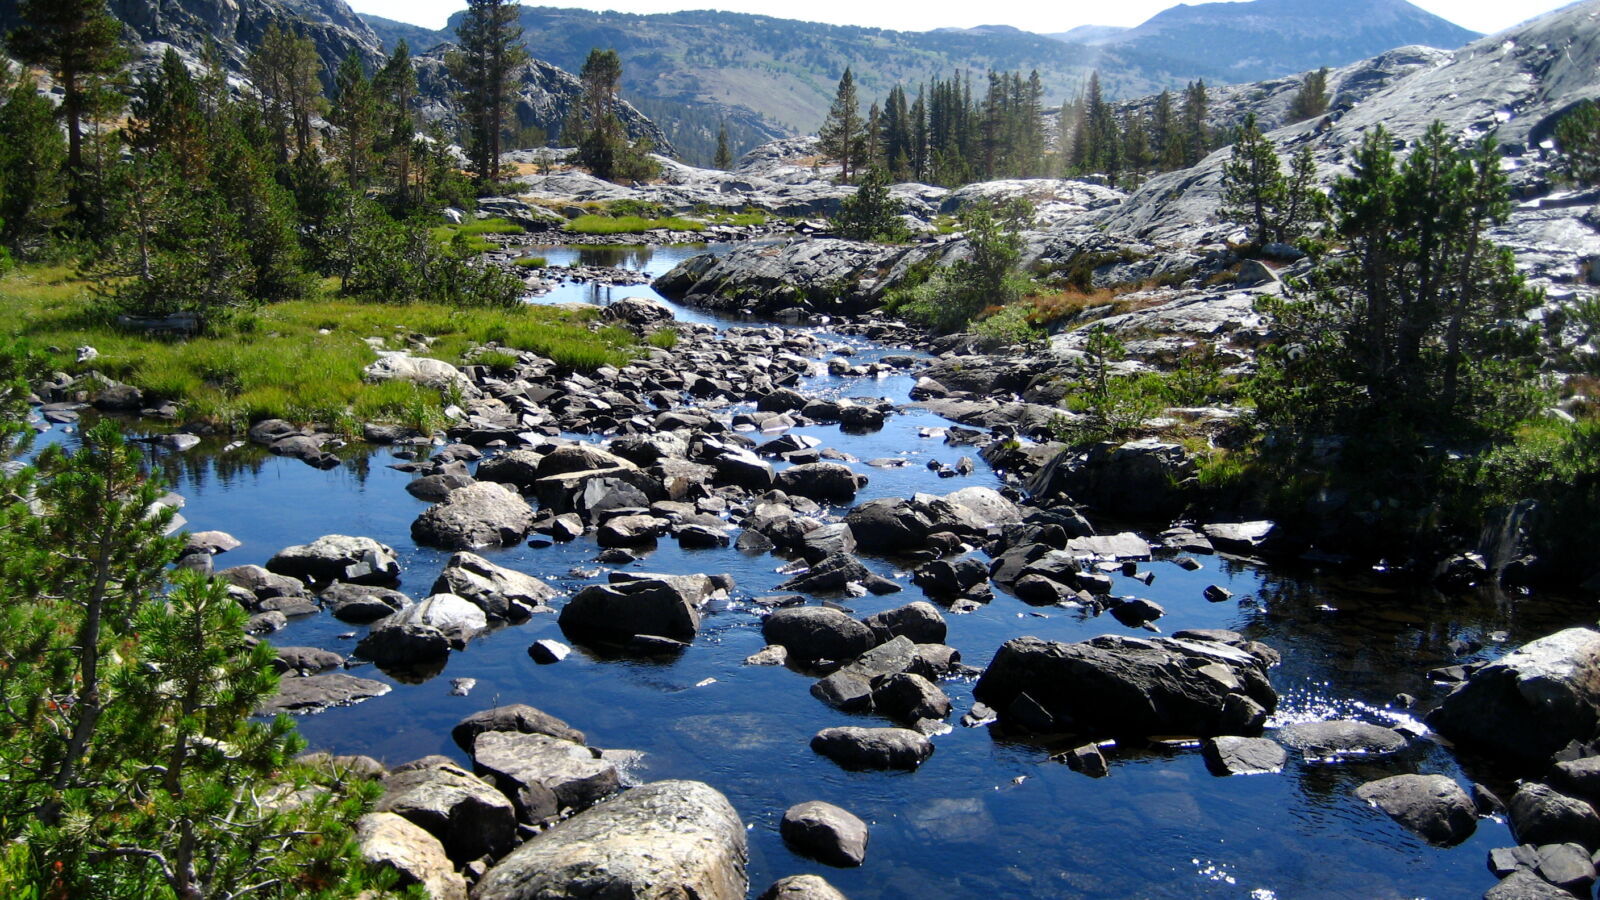 https://www.nationalforests.org/assets/blog/_1600x1600_fit_center-center_80_none/Inyo-NF_San-Joaquin-River-Thousand-Island-Lake_jcookfisher.jpg